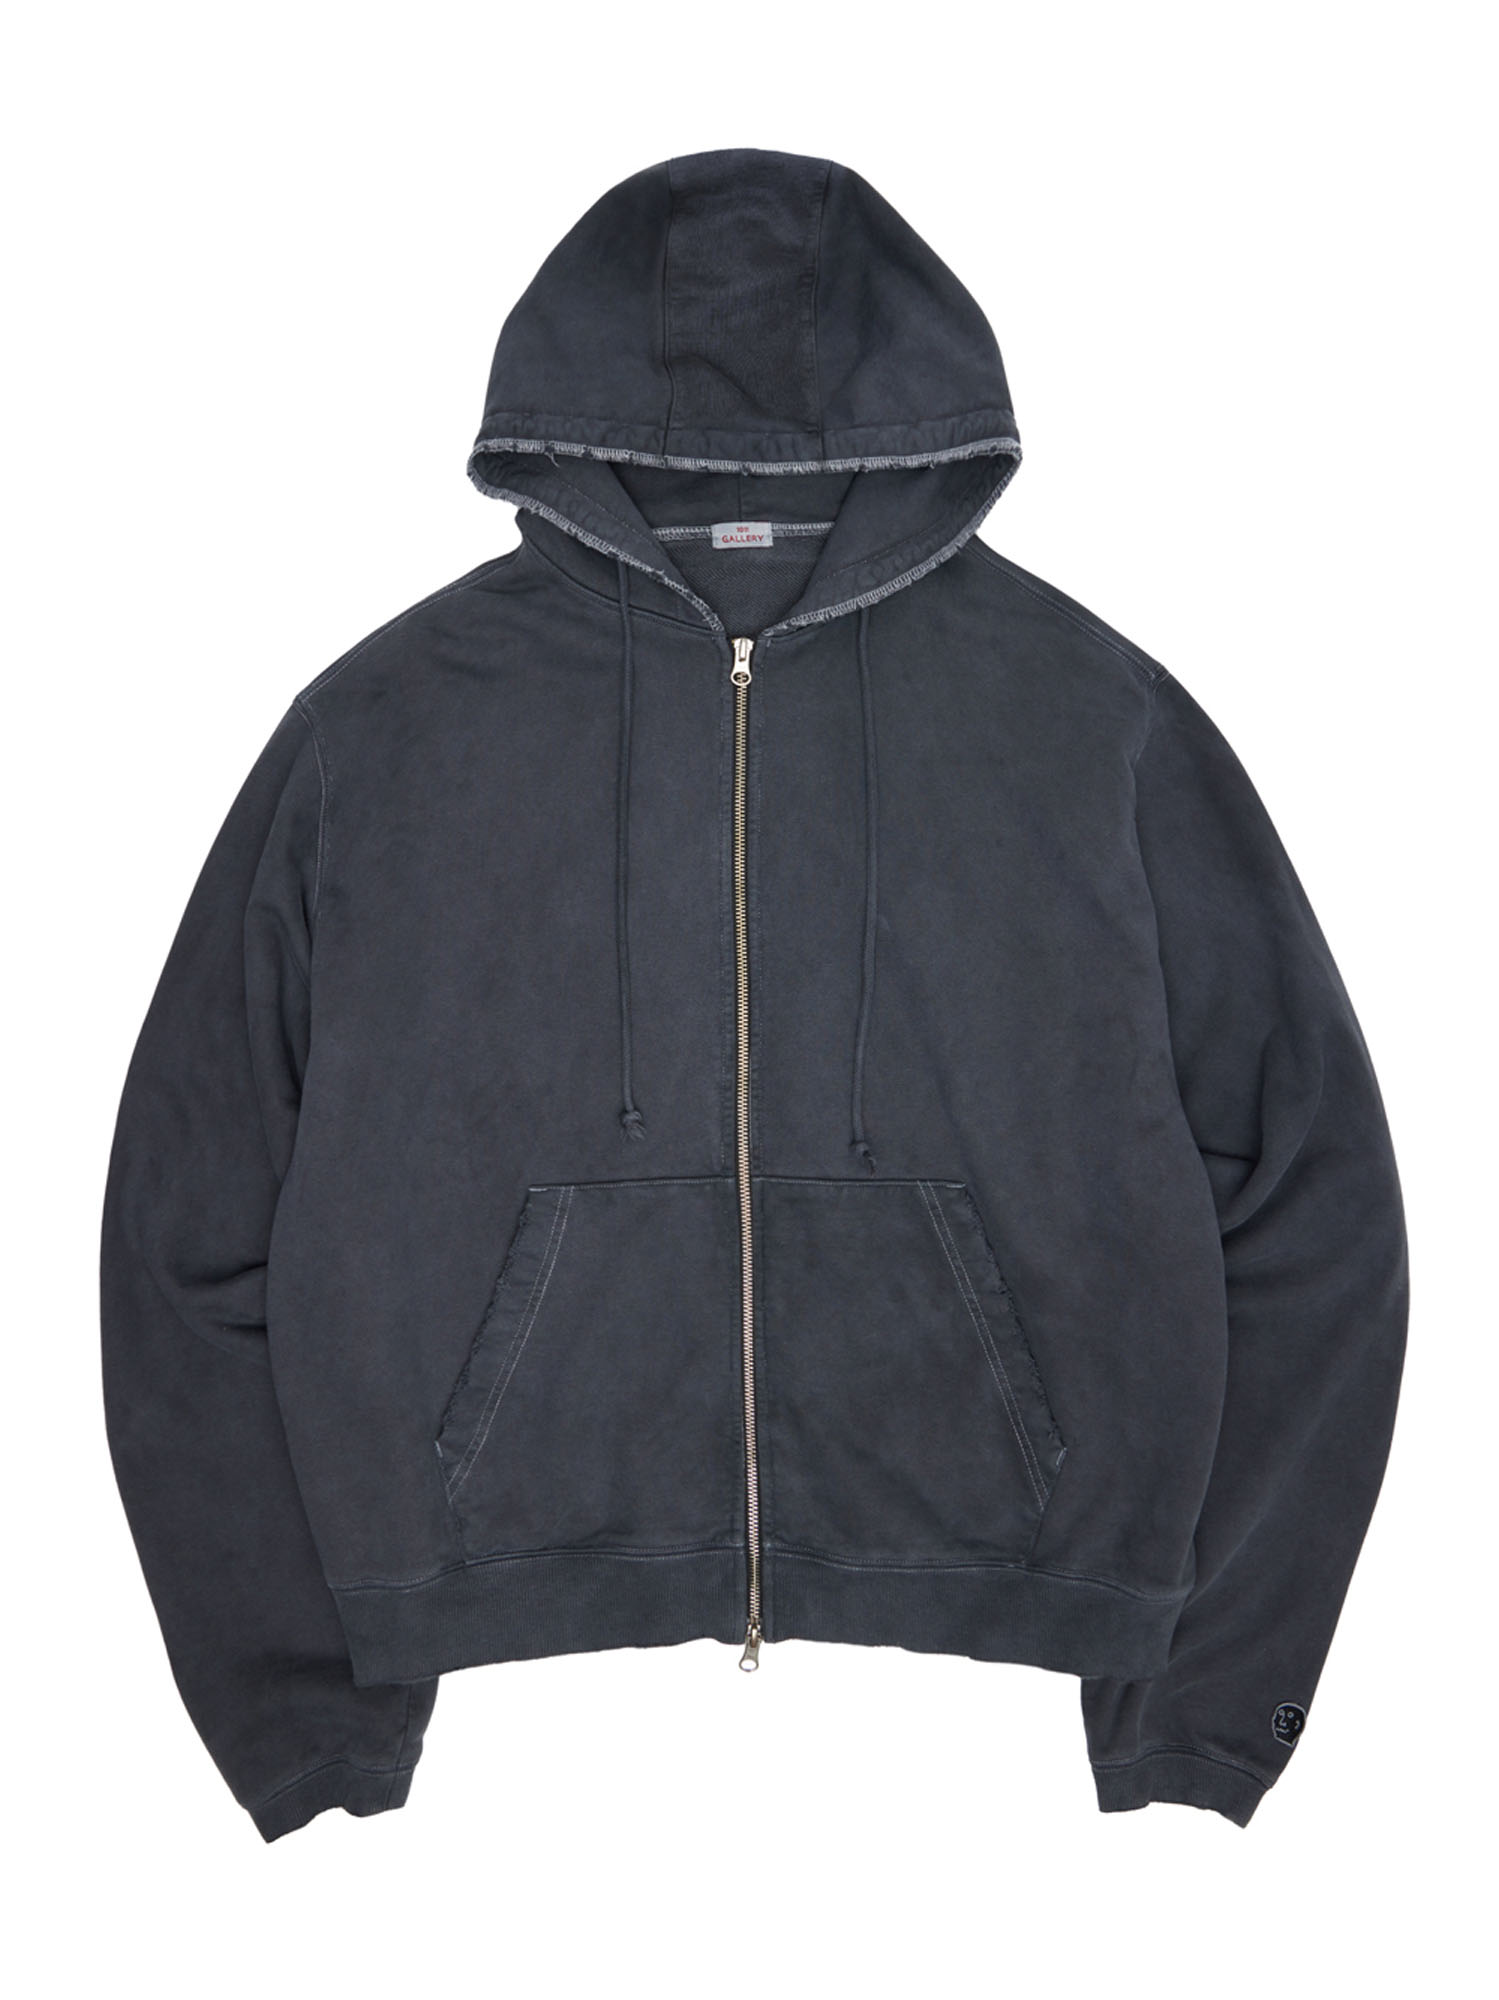 Gallery Dying Embroidered Zip Up - Charcoal Grey